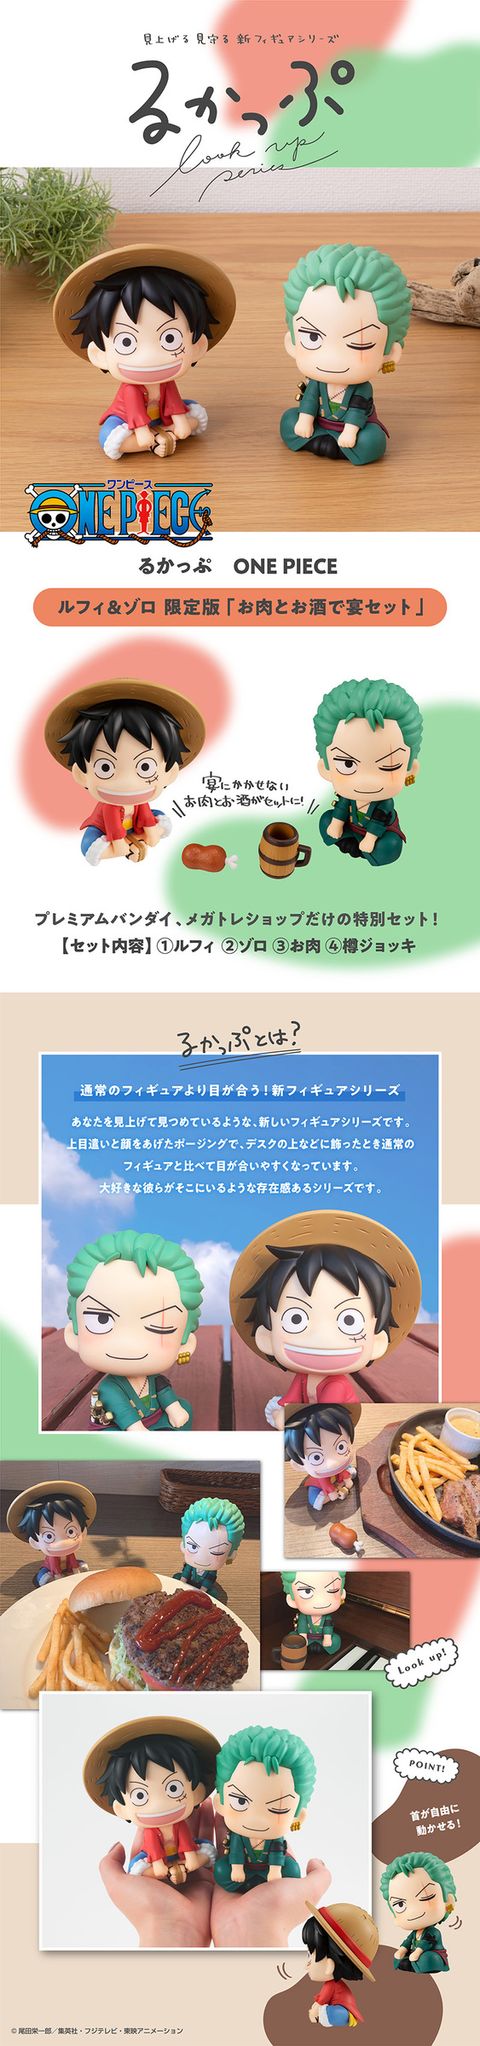 LOOKUP ONE PIECE Luffy & Zoro SET (with gift).jpg